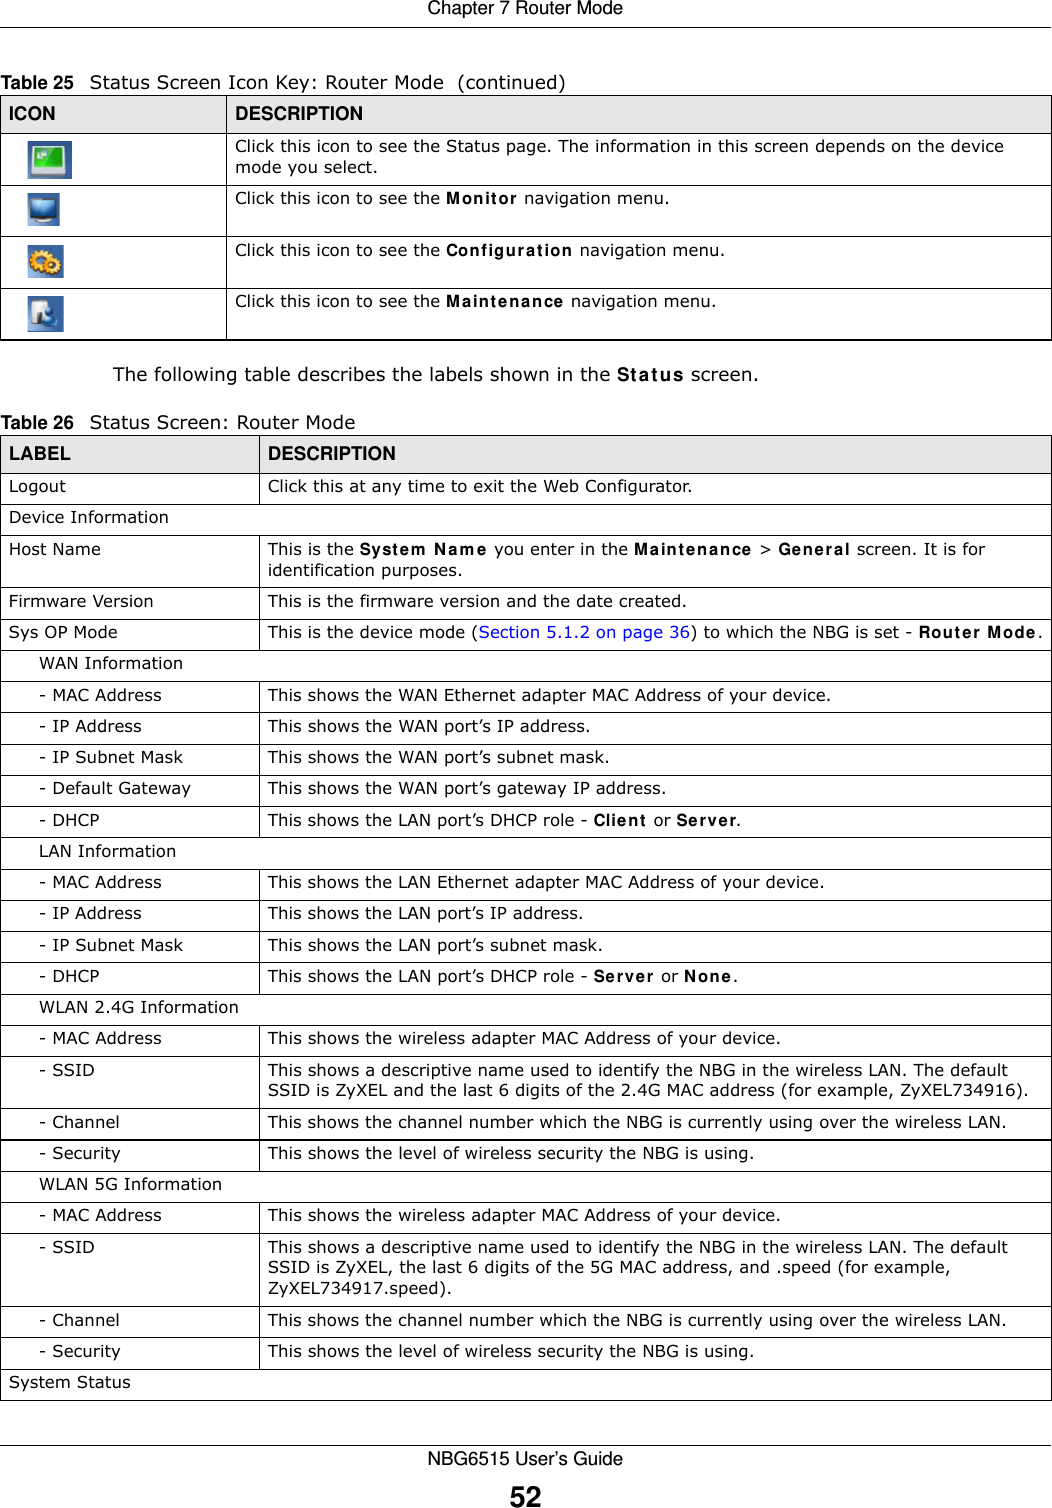 Chapter 7 Router ModeNBG6515 User’s Guide52The following table describes the labels shown in the Status screen.Click this icon to see the Status page. The information in this screen depends on the device mode you select. Click this icon to see the Monitor navigation menu. Click this icon to see the Configuration navigation menu. Click this icon to see the Maintenance navigation menu. Table 25   Status Screen Icon Key: Router Mode  (continued)ICON DESCRIPTIONTable 26   Status Screen: Router Mode LABEL DESCRIPTIONLogout Click this at any time to exit the Web Configurator.Device InformationHost Name This is the System Name you enter in the Maintenance &gt; General screen. It is for identification purposes.Firmware Version This is the firmware version and the date created. Sys OP Mode This is the device mode (Section 5.1.2 on page 36) to which the NBG is set - Router Mode.WAN Information- MAC Address This shows the WAN Ethernet adapter MAC Address of your device.- IP Address This shows the WAN port’s IP address.- IP Subnet Mask This shows the WAN port’s subnet mask.- Default Gateway This shows the WAN port’s gateway IP address.- DHCP This shows the LAN port’s DHCP role - Client or Server.LAN Information- MAC Address This shows the LAN Ethernet adapter MAC Address of your device.- IP Address This shows the LAN port’s IP address.- IP Subnet Mask This shows the LAN port’s subnet mask.- DHCP This shows the LAN port’s DHCP role - Server or None.WLAN 2.4G Information- MAC Address This shows the wireless adapter MAC Address of your device.- SSID This shows a descriptive name used to identify the NBG in the wireless LAN. The default SSID is ZyXEL and the last 6 digits of the 2.4G MAC address (for example, ZyXEL734916).- Channel This shows the channel number which the NBG is currently using over the wireless LAN.- Security This shows the level of wireless security the NBG is using.WLAN 5G Information- MAC Address This shows the wireless adapter MAC Address of your device.- SSID This shows a descriptive name used to identify the NBG in the wireless LAN. The default SSID is ZyXEL, the last 6 digits of the 5G MAC address, and .speed (for example, ZyXEL734917.speed).- Channel This shows the channel number which the NBG is currently using over the wireless LAN.- Security This shows the level of wireless security the NBG is using.System Status